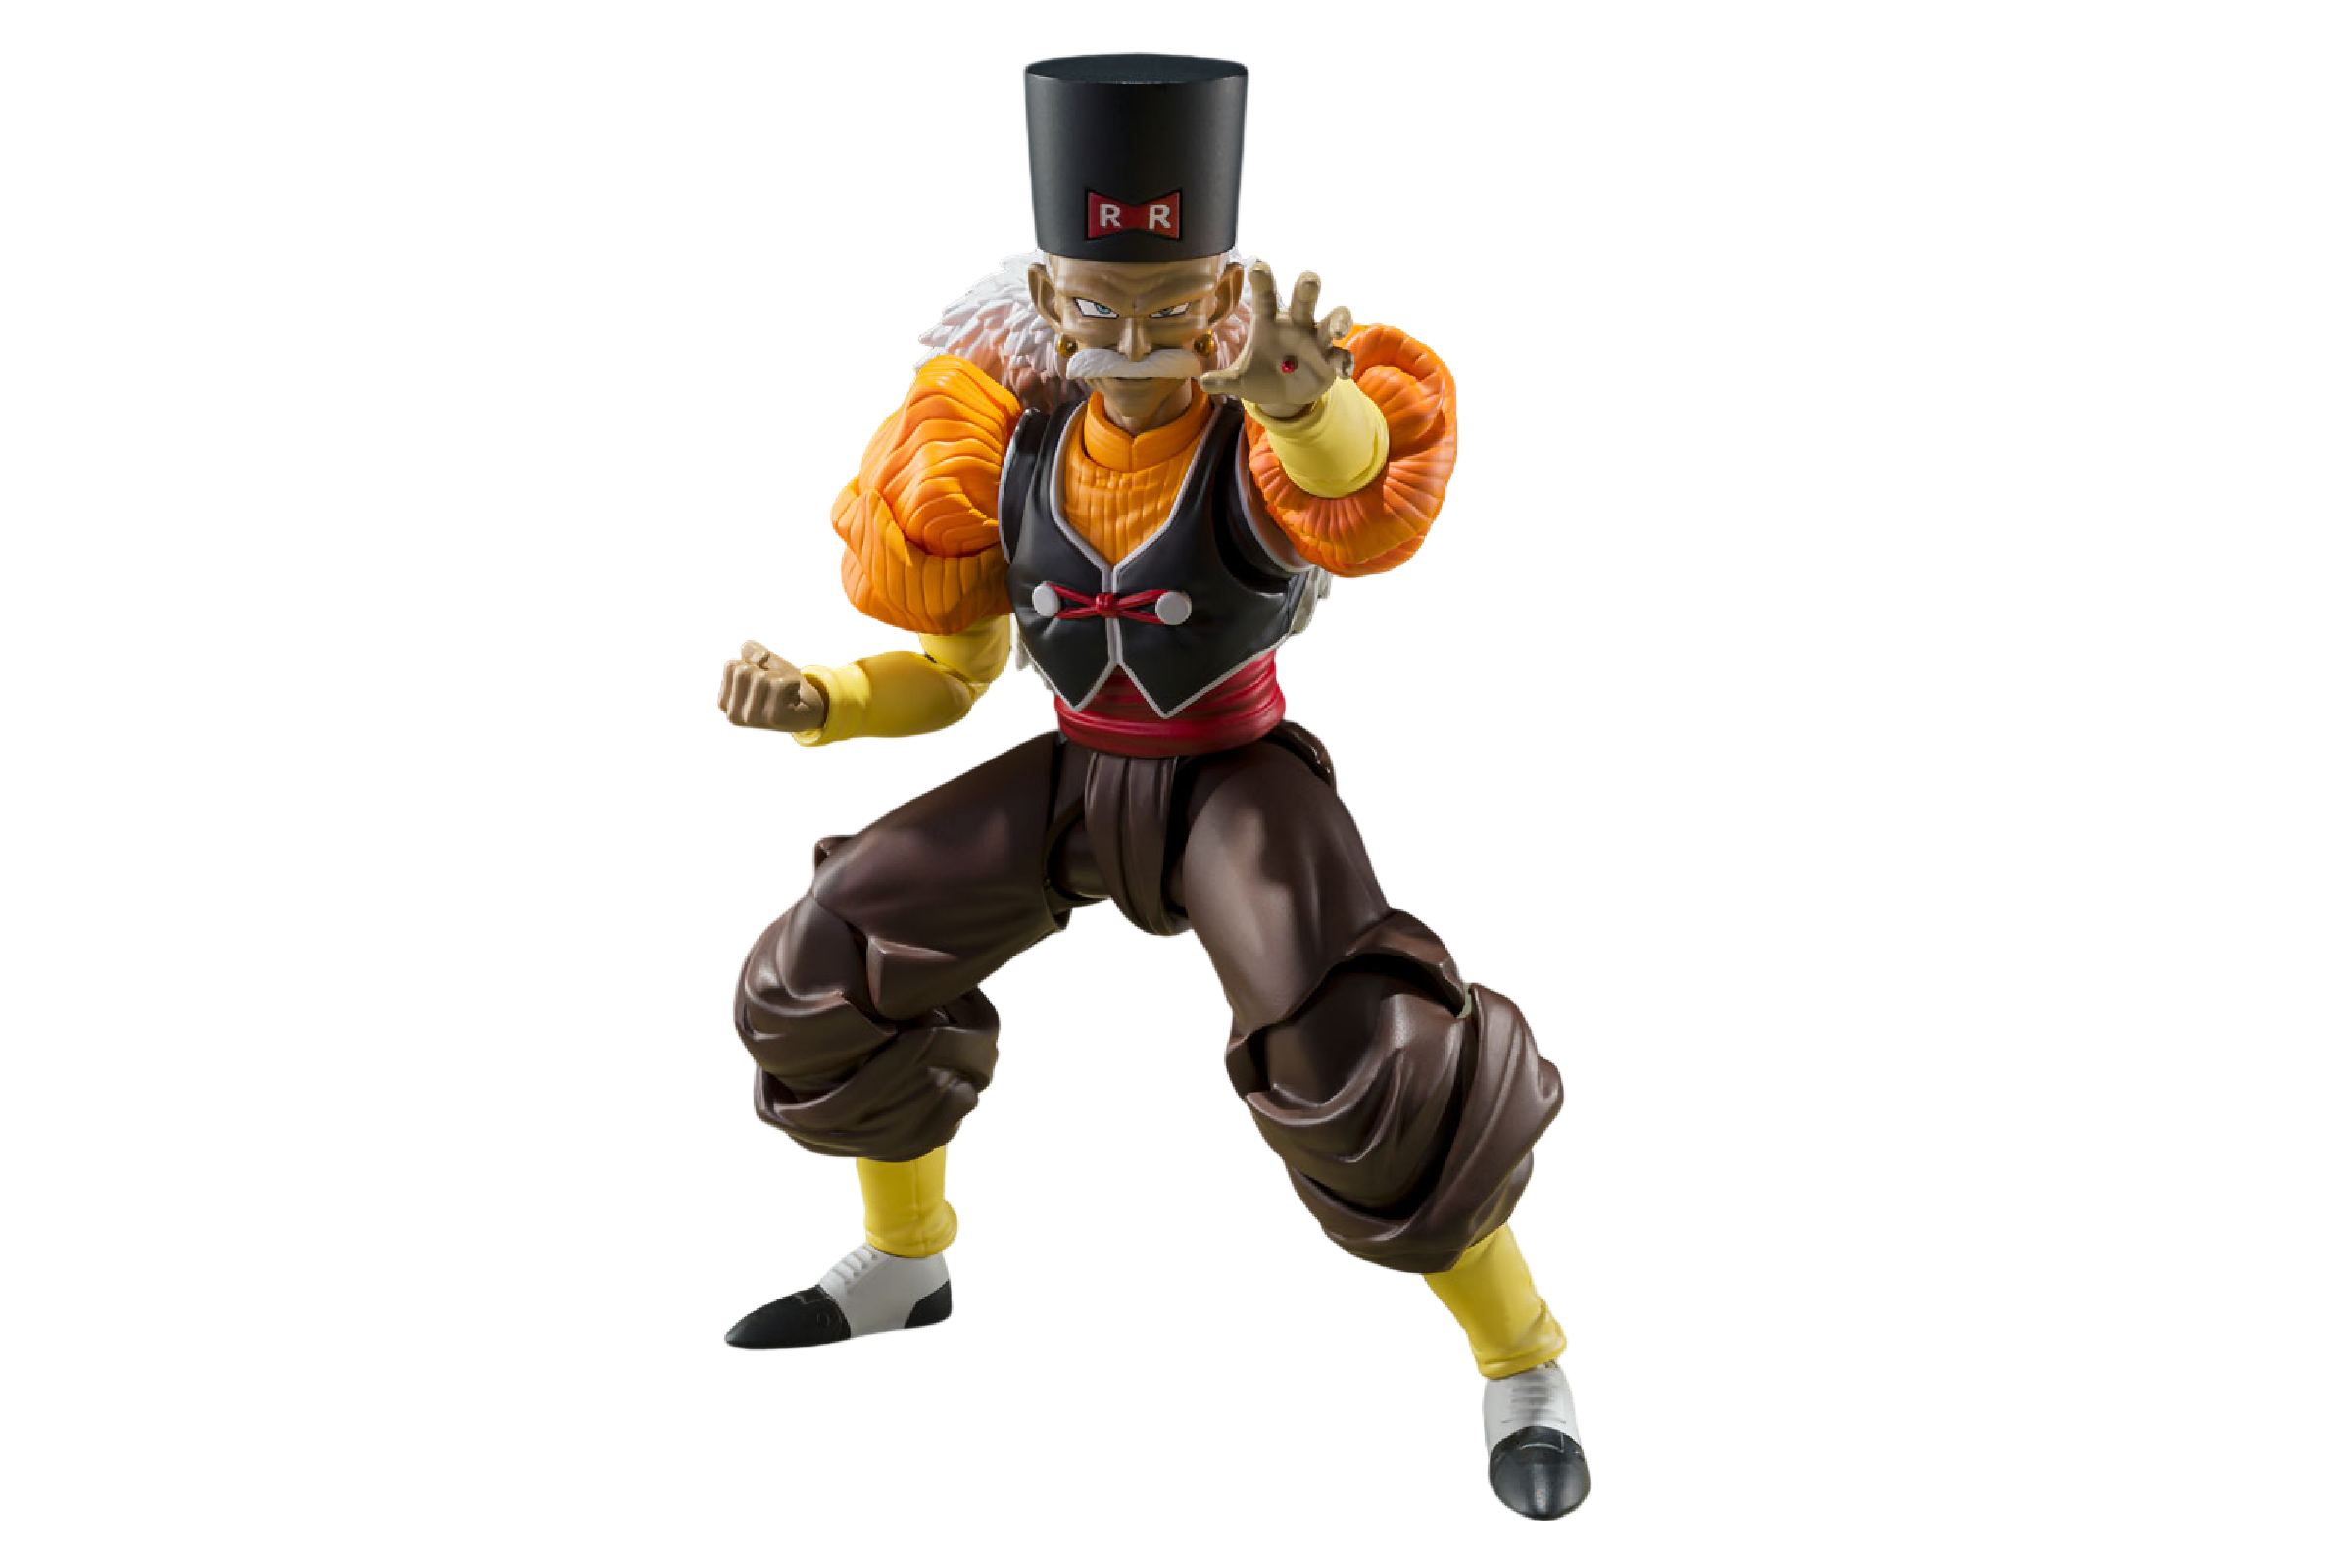 Android 19 From Dragon Ball Z Is Coming to S.H.Figuarts!]